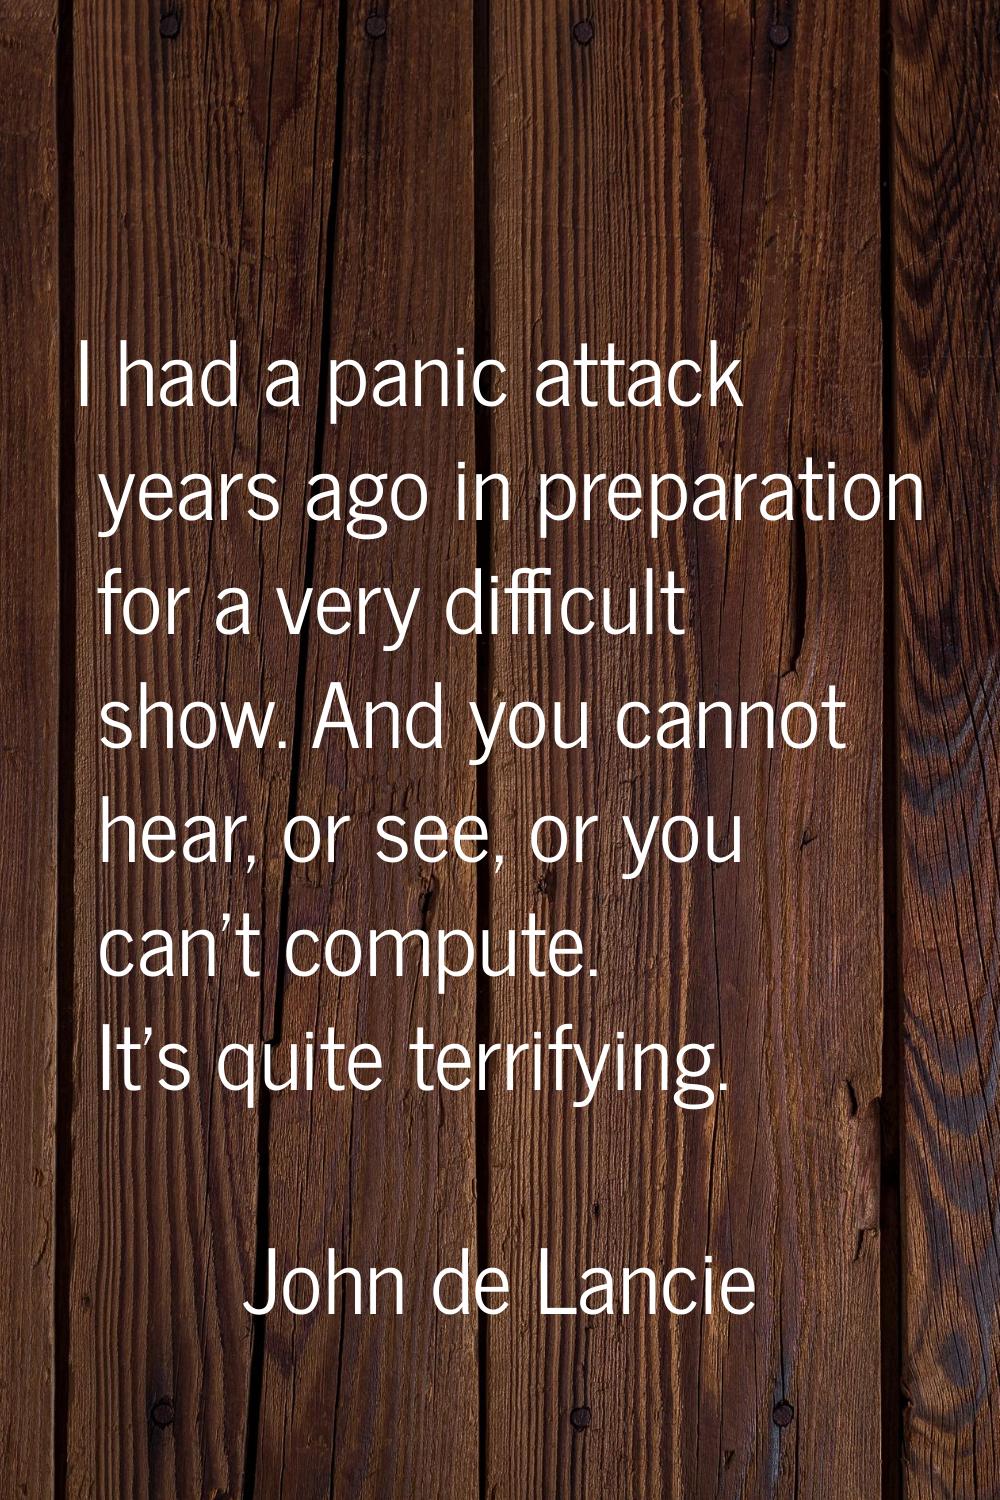 I had a panic attack years ago in preparation for a very difficult show. And you cannot hear, or se